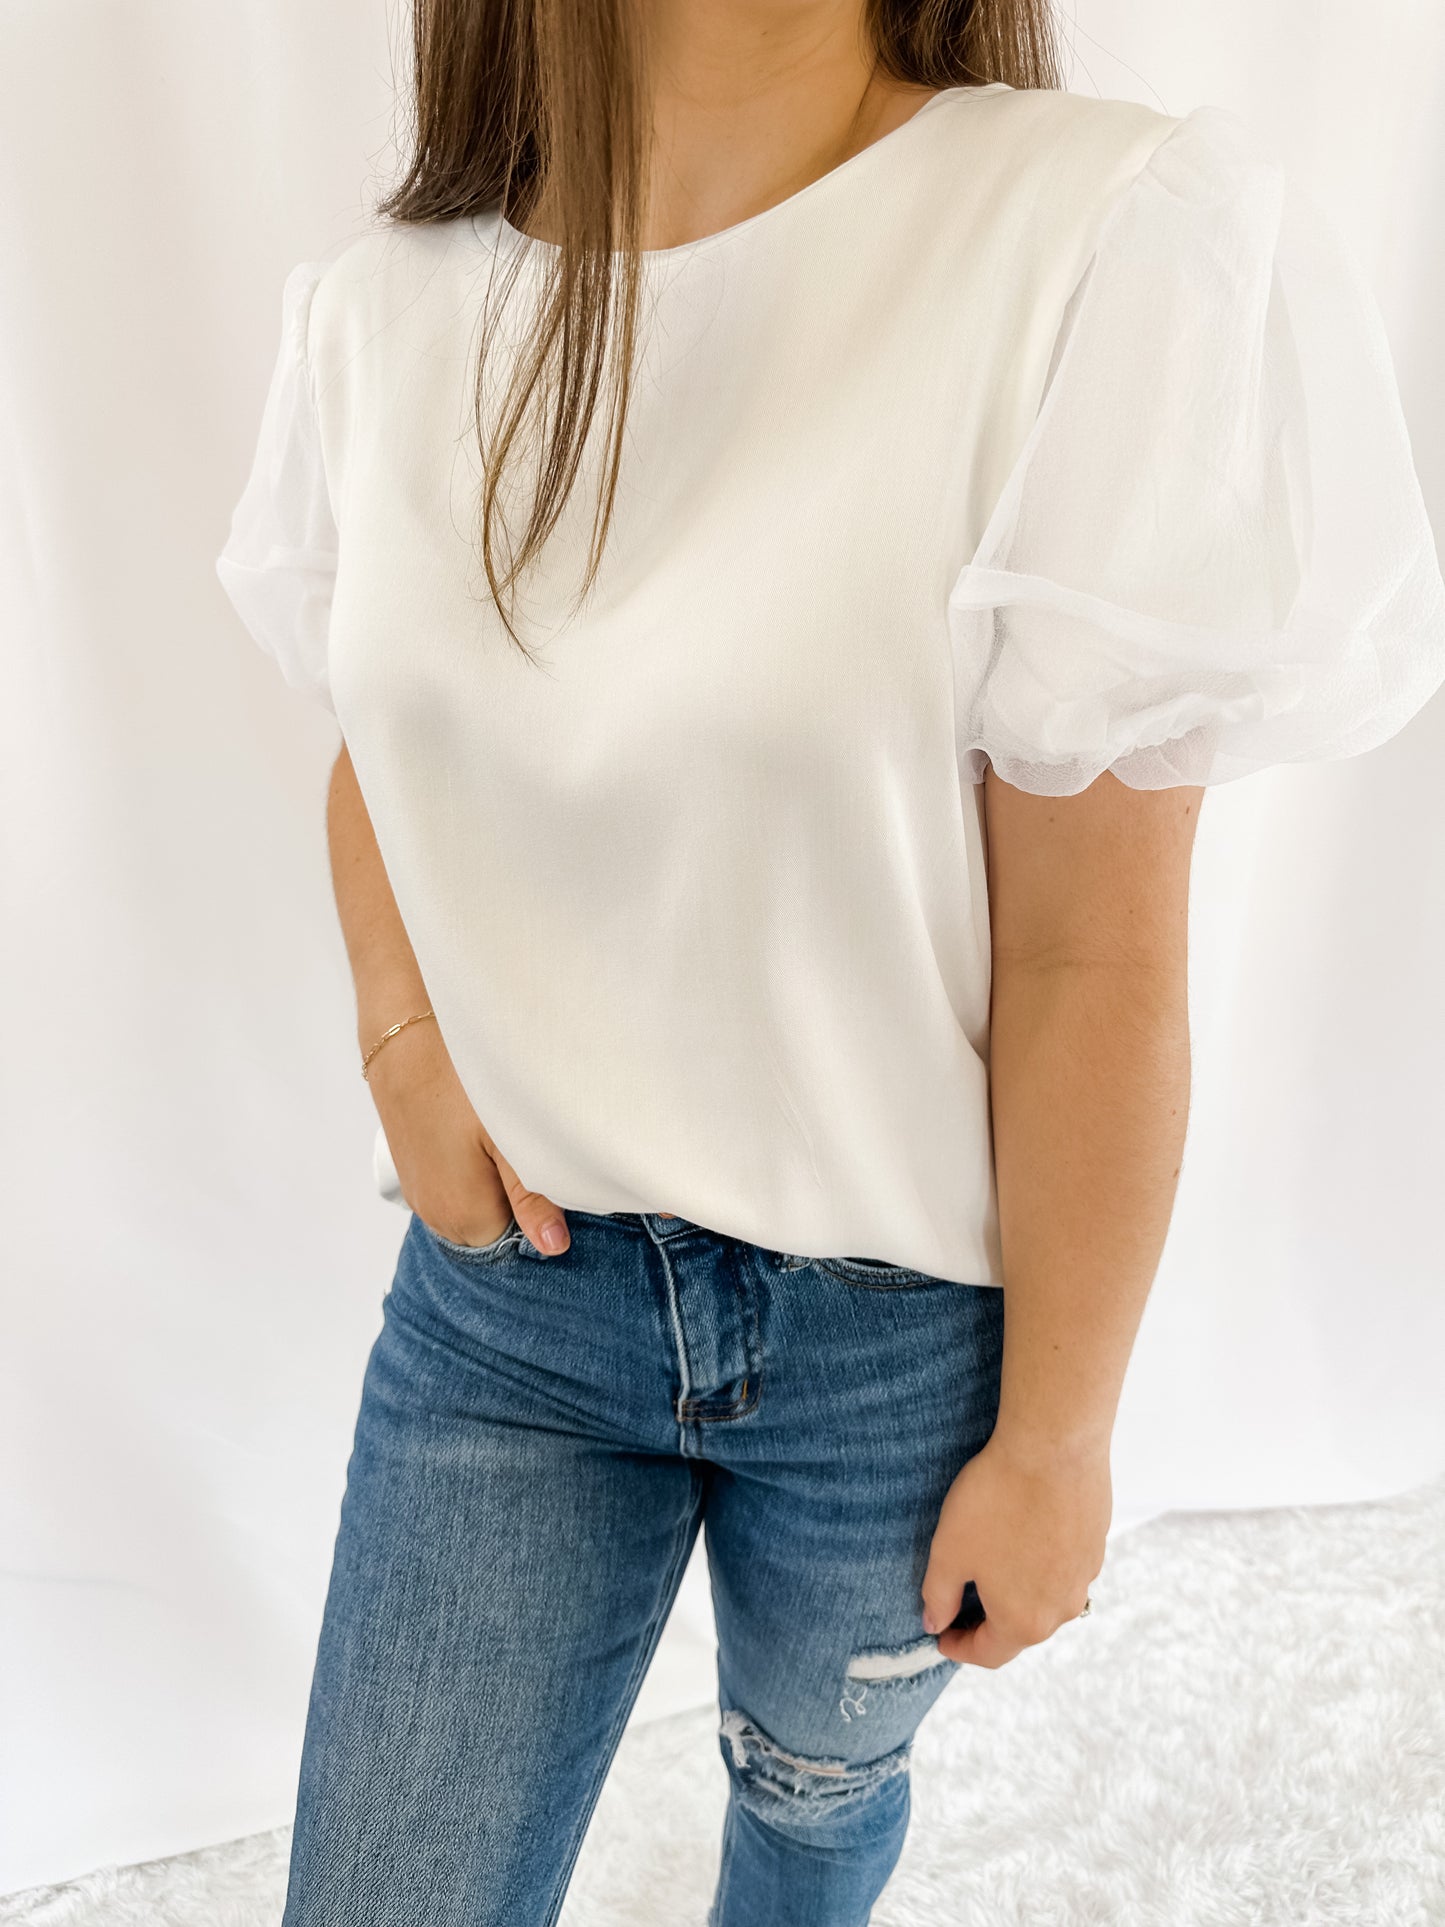 The Best Part Puff Sleeve Top